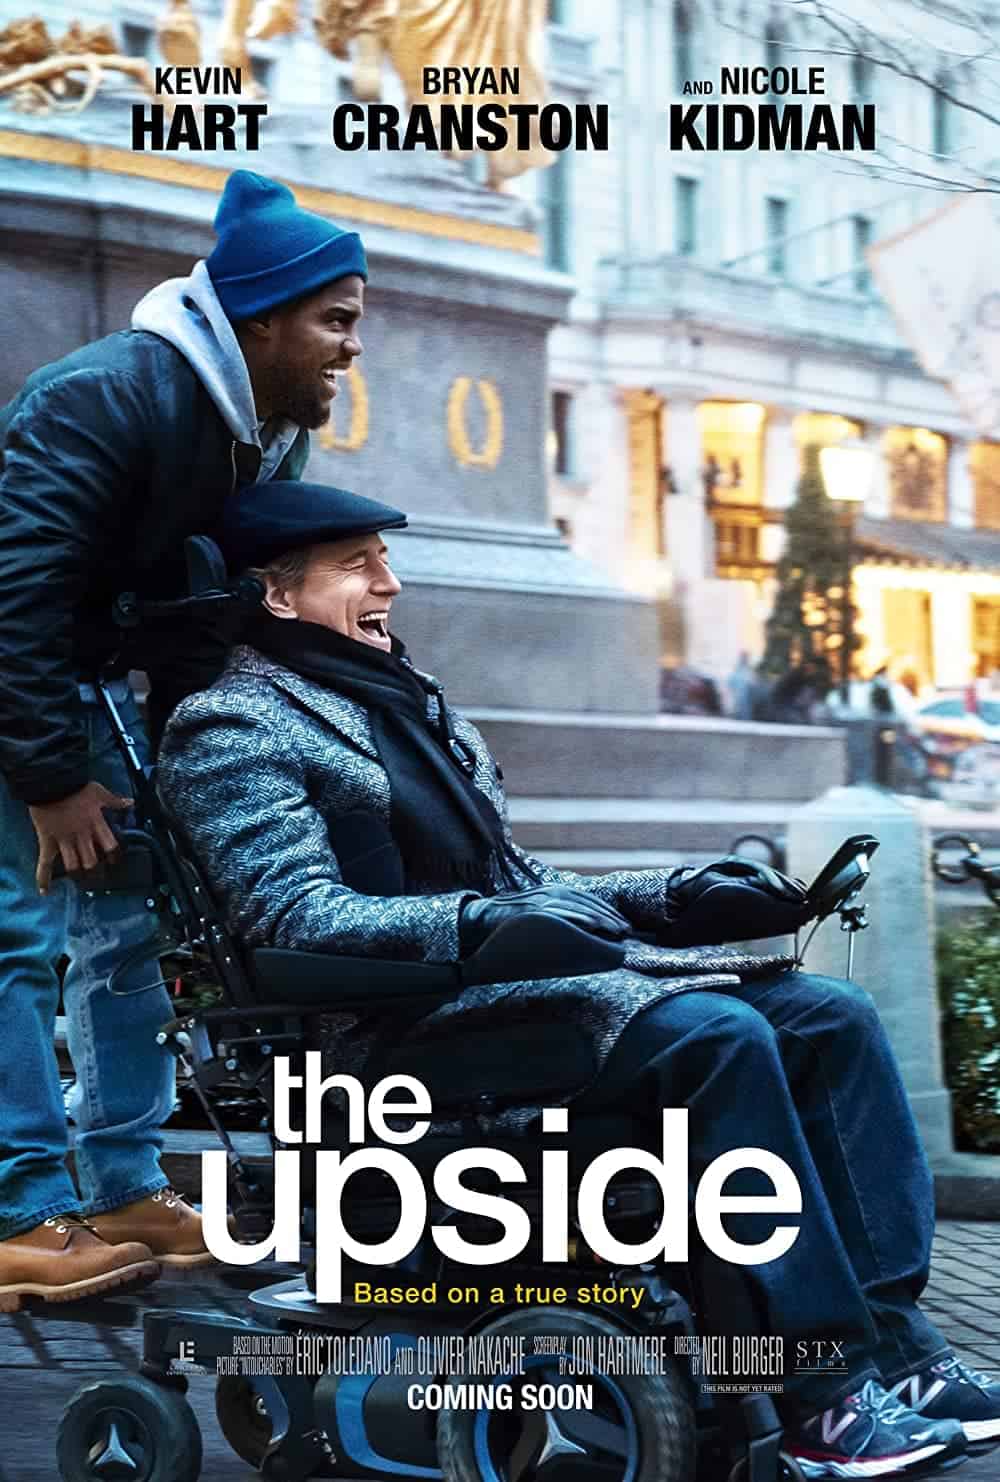 The Upside (2017) Best Kevin Hart Movies (Ranked)